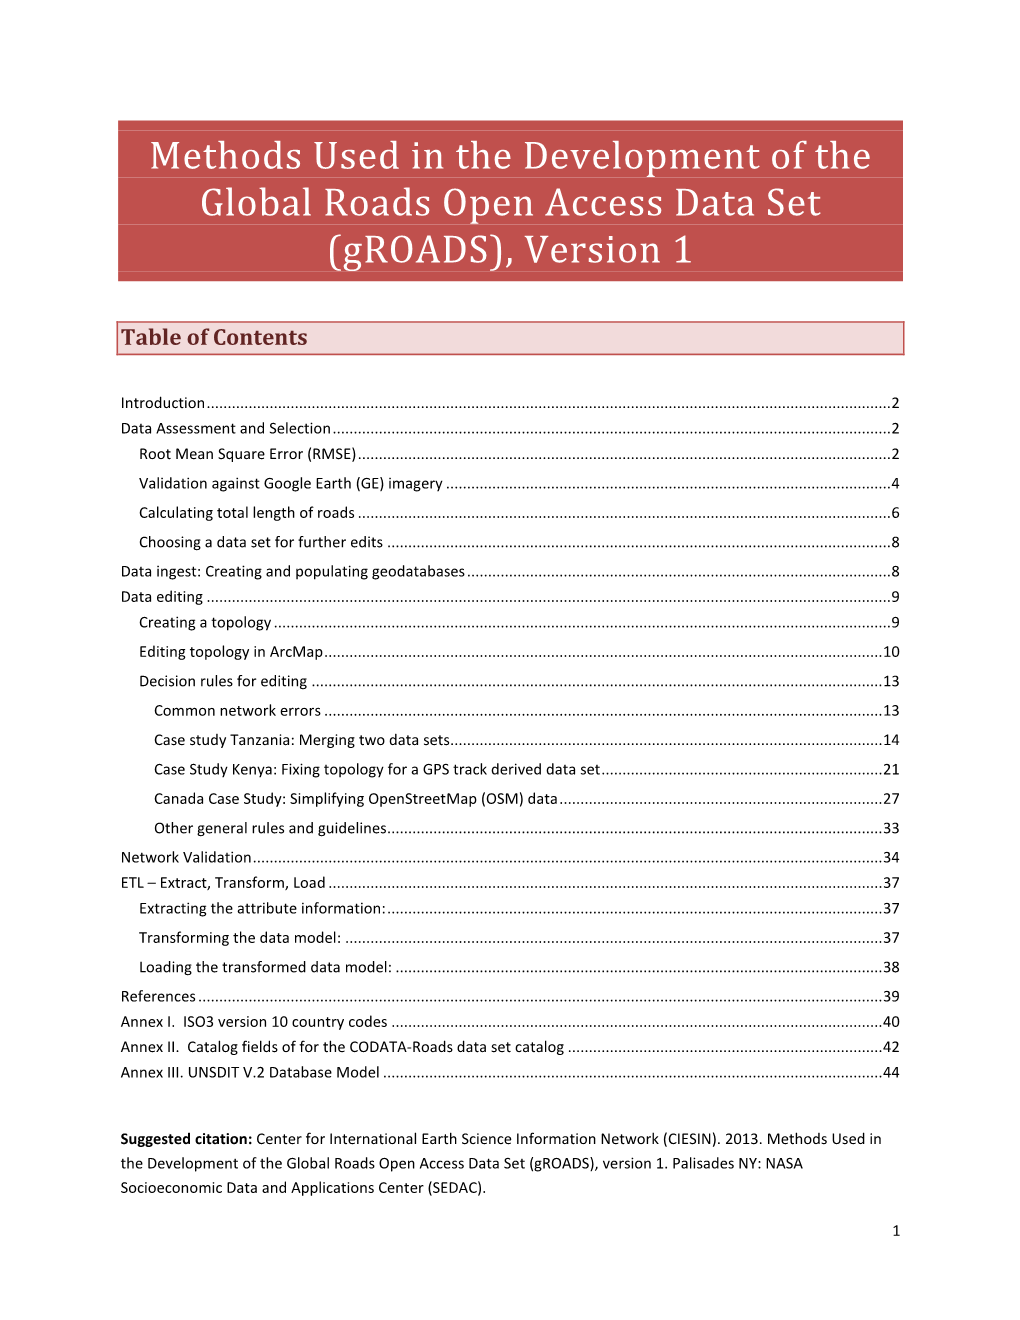 Methods Used in the Development of the Global Roads Open Access Data Set (Groads), Version 1